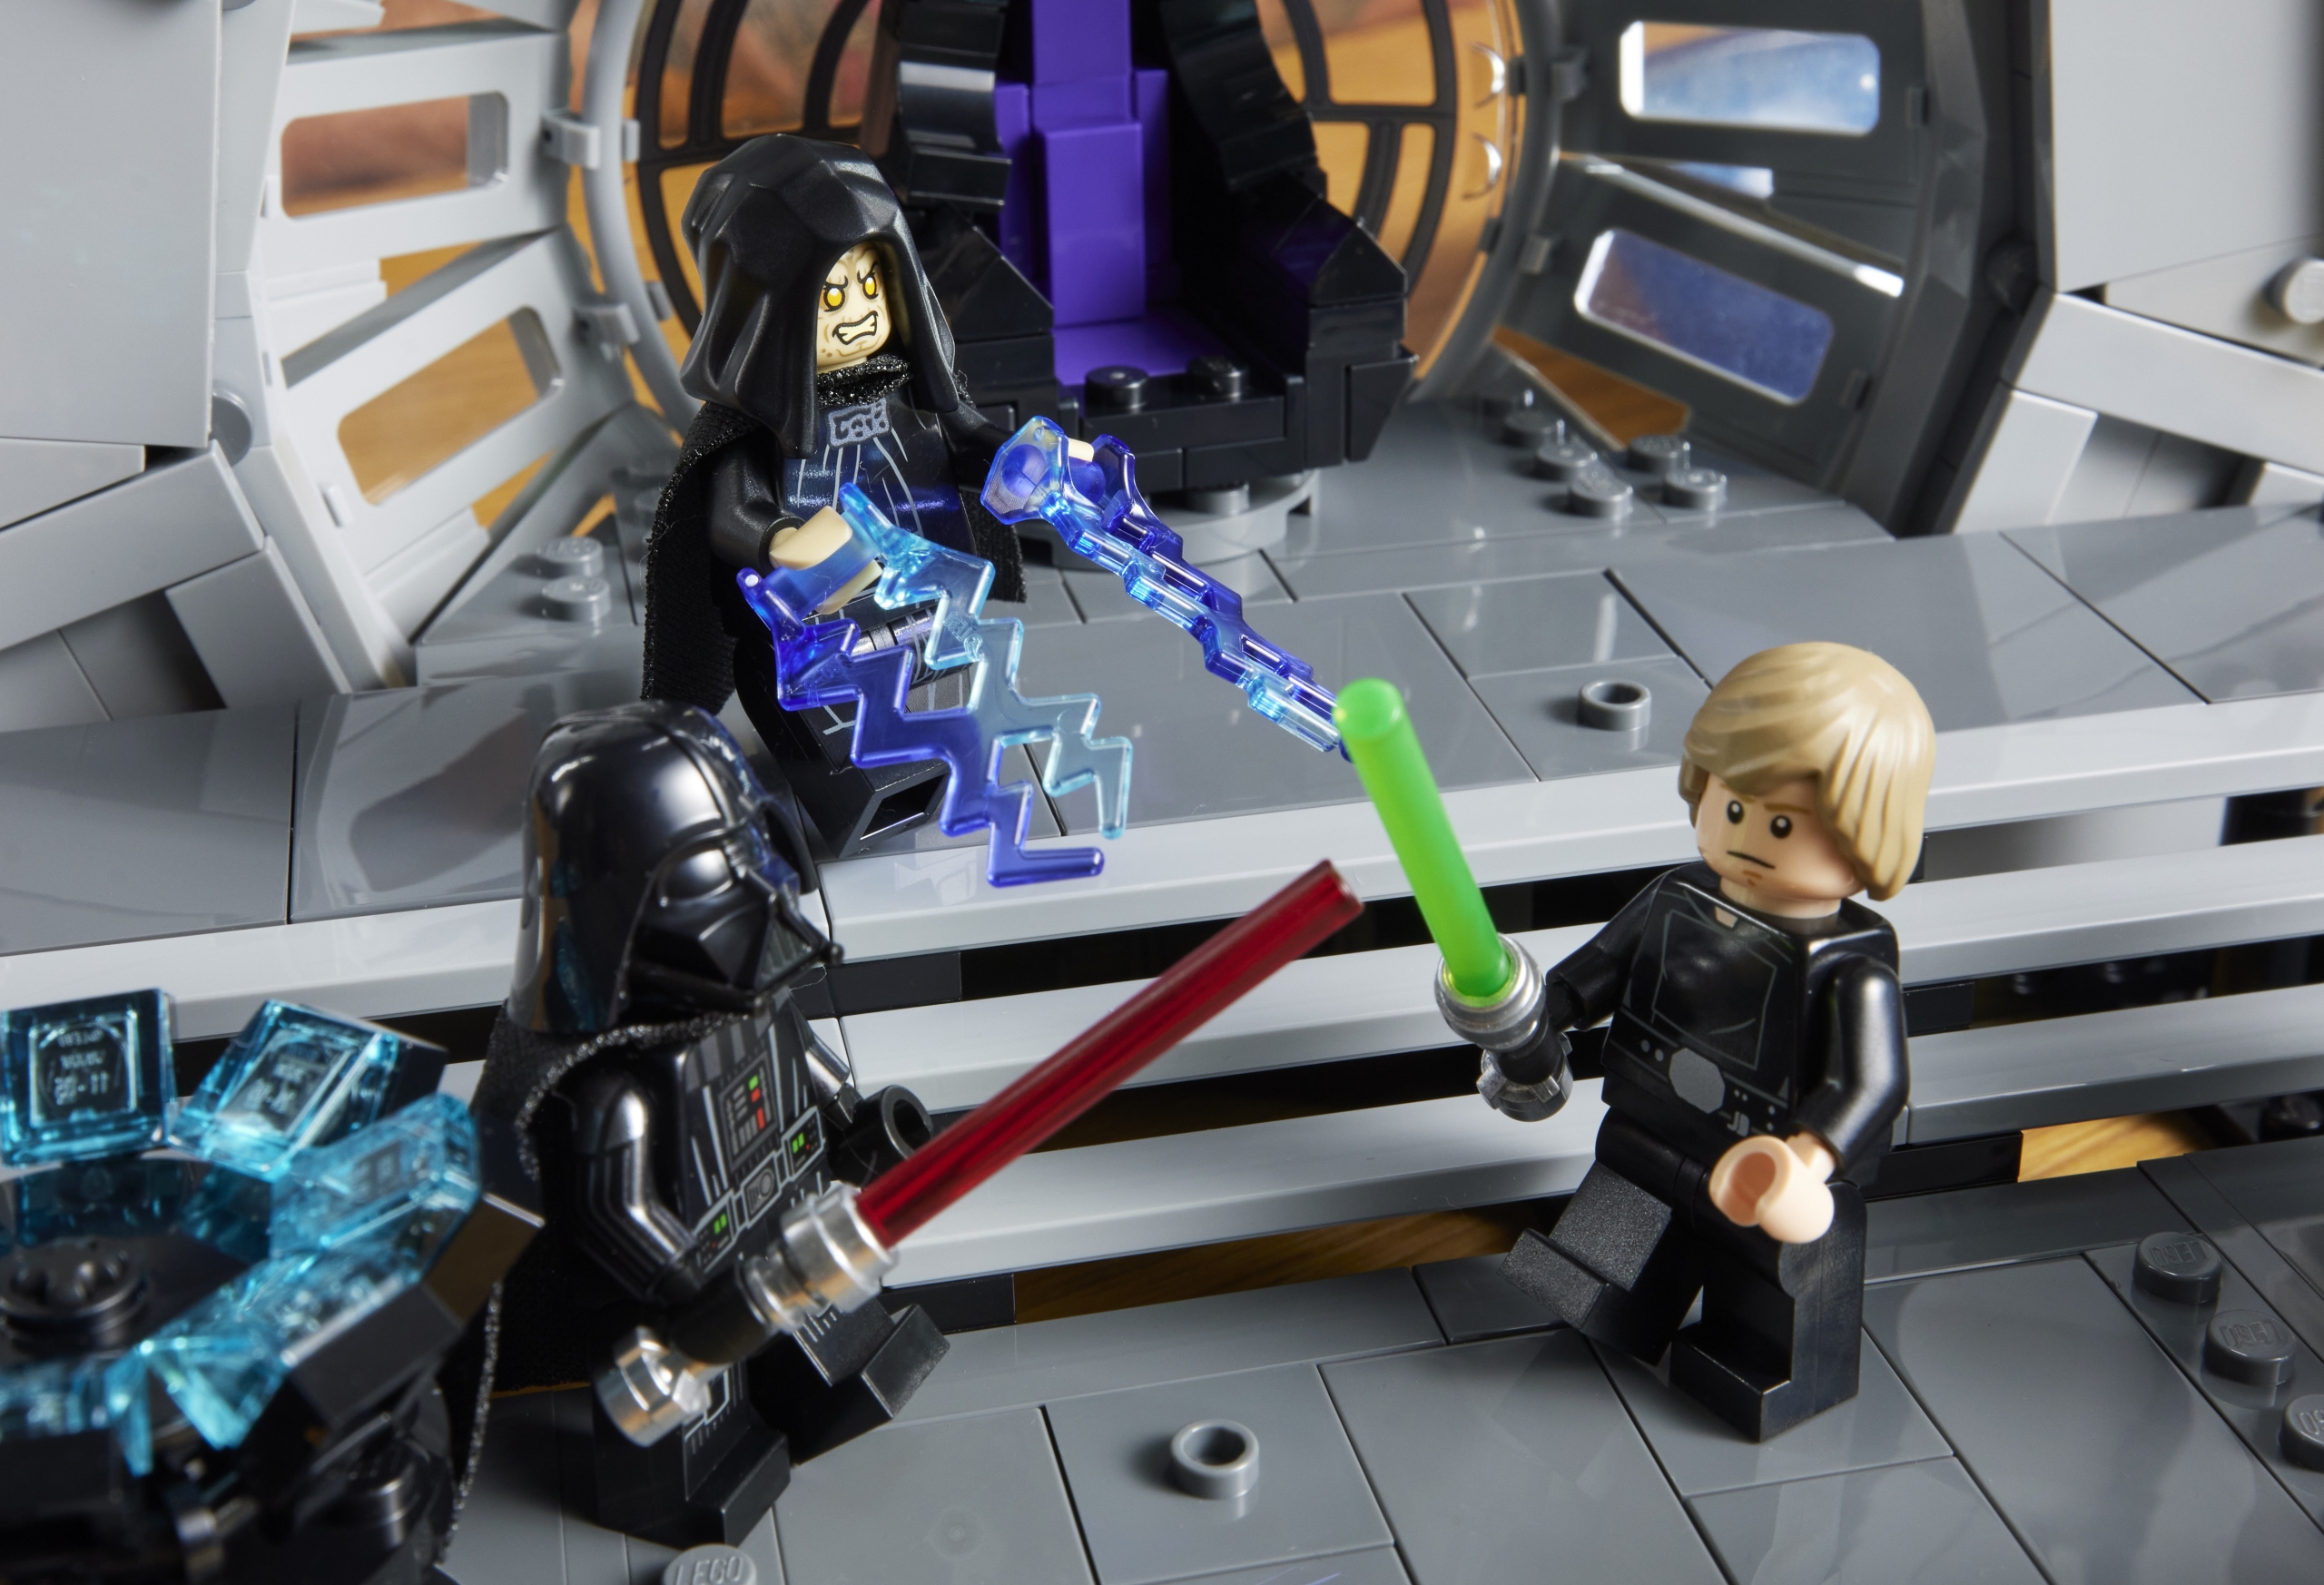 LEGO reveals two new Return of the Jedi Dioramas - 75352 Emperor's Throne  Room and 75353 Endor Speeder Chase - Jay's Brick Blog